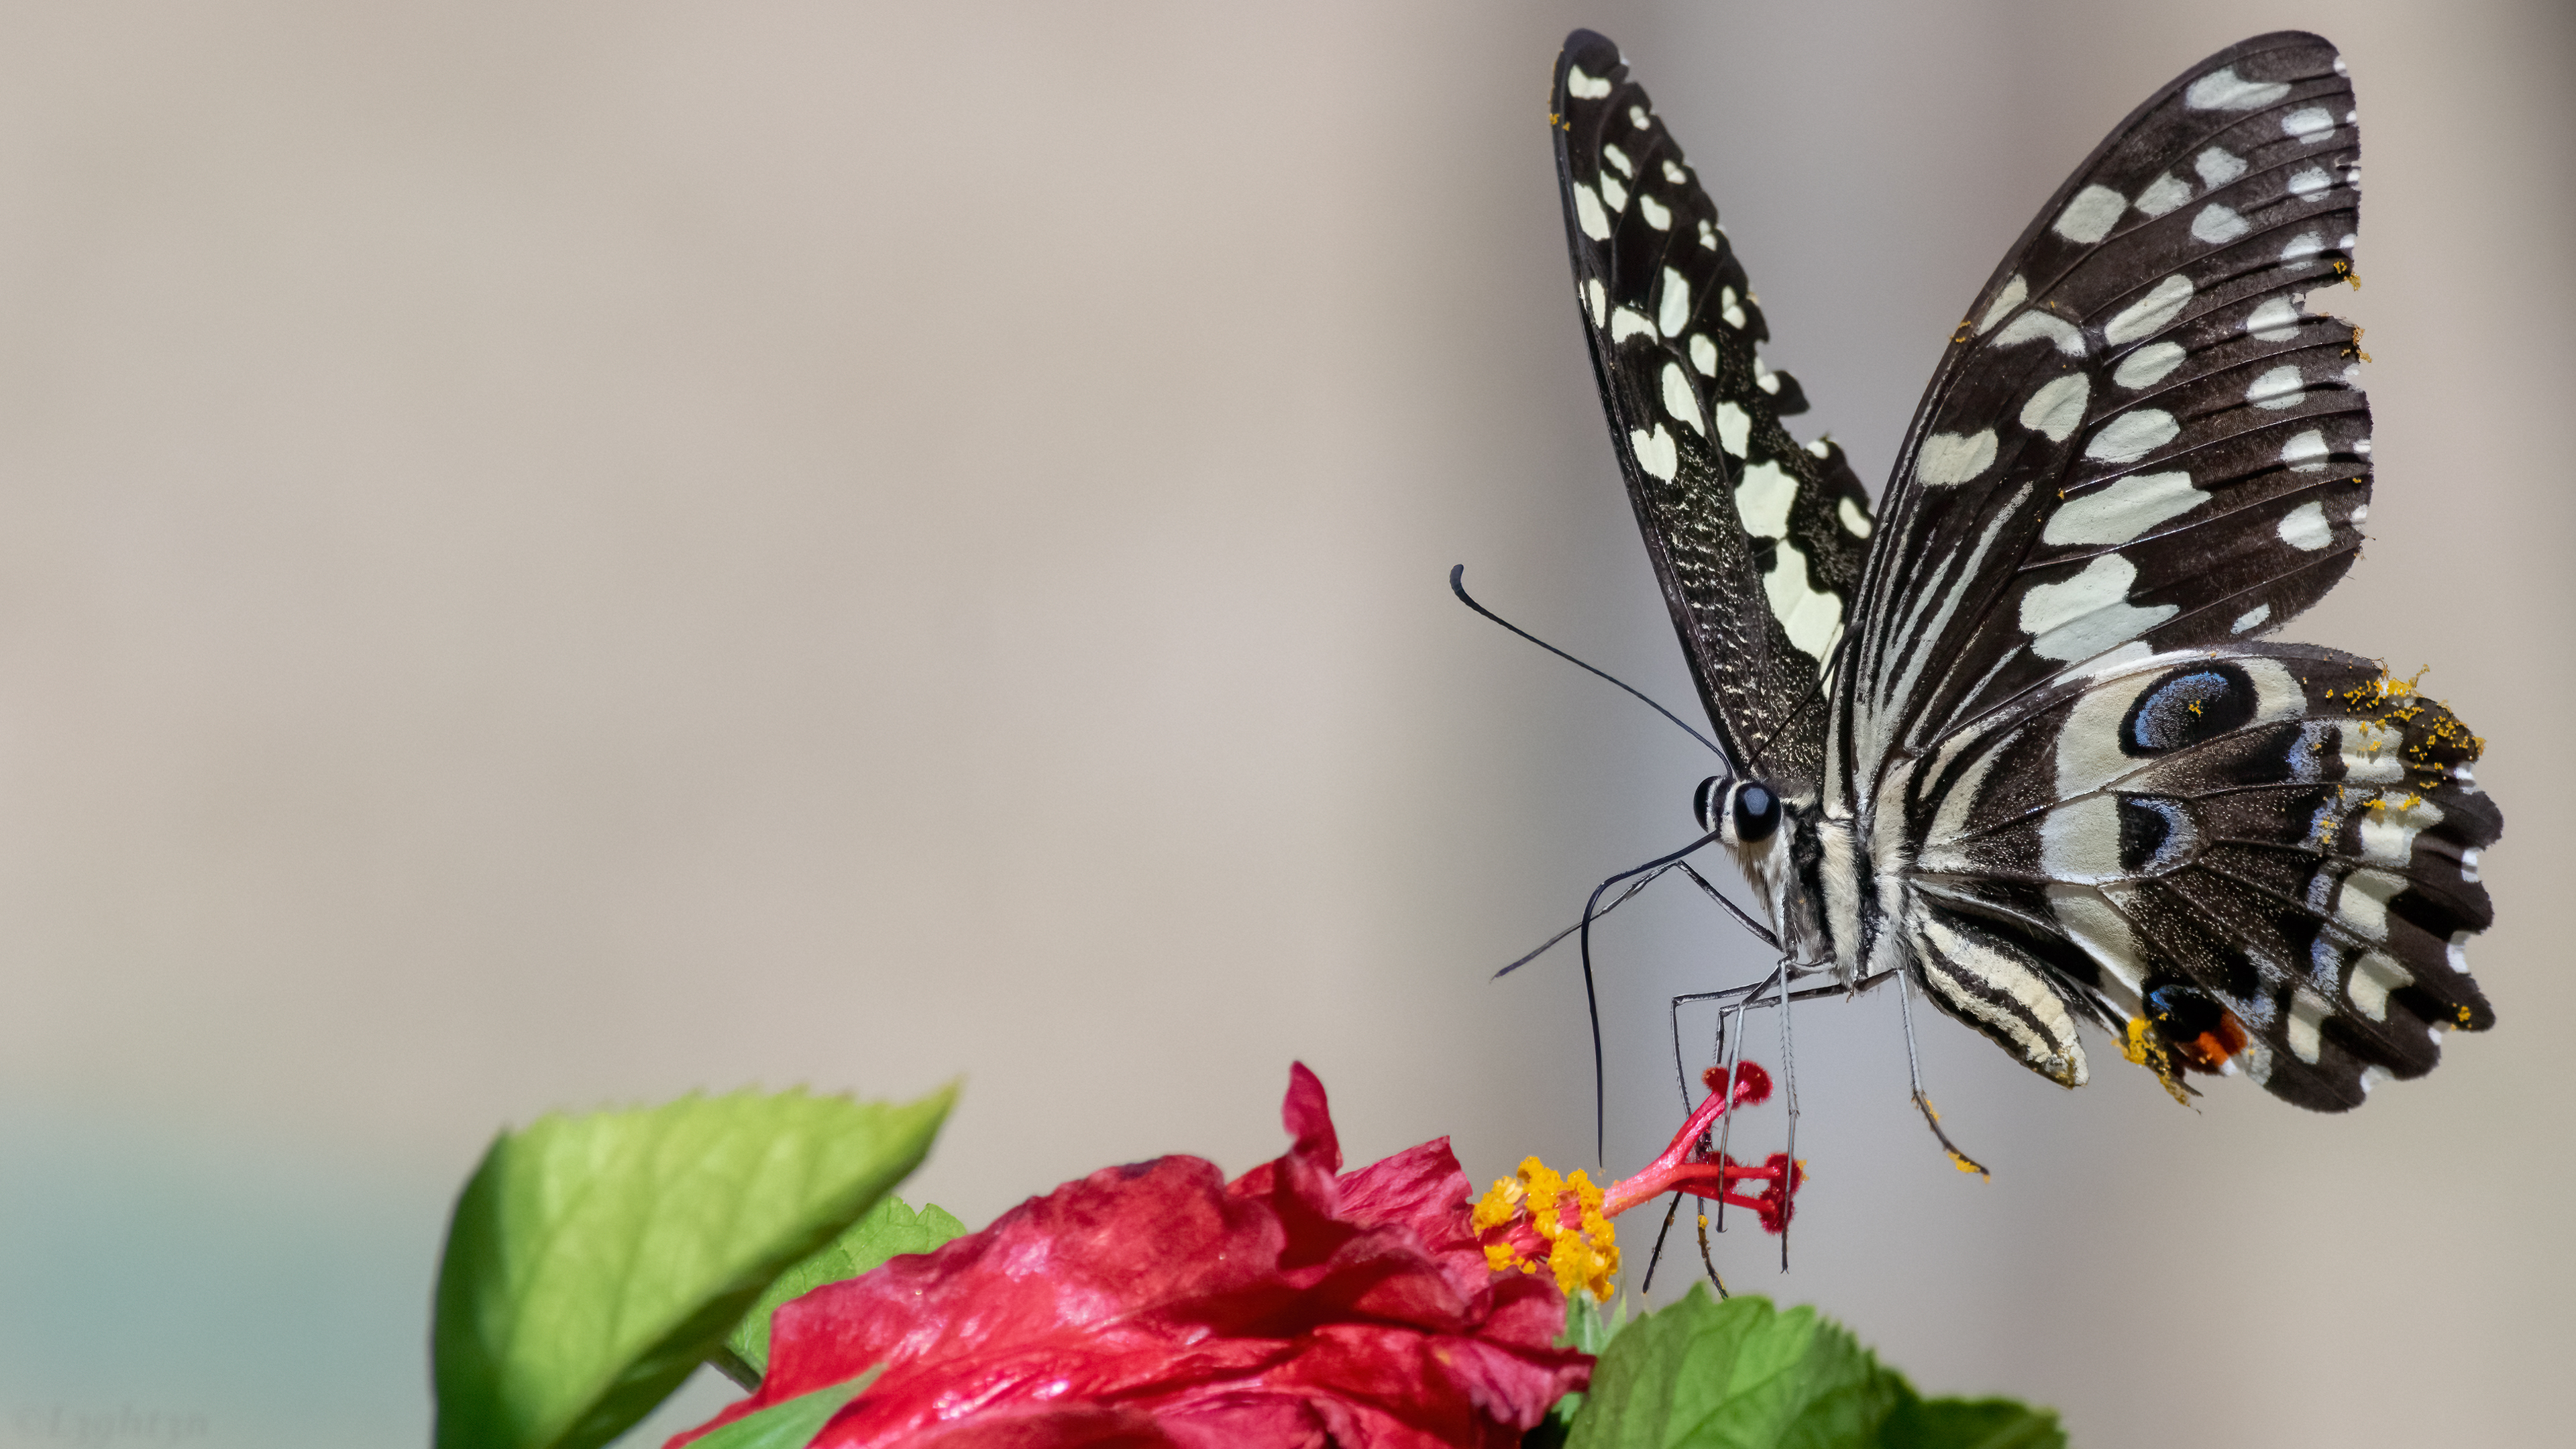 General 3840x2160 butterfly photography animals insect macro